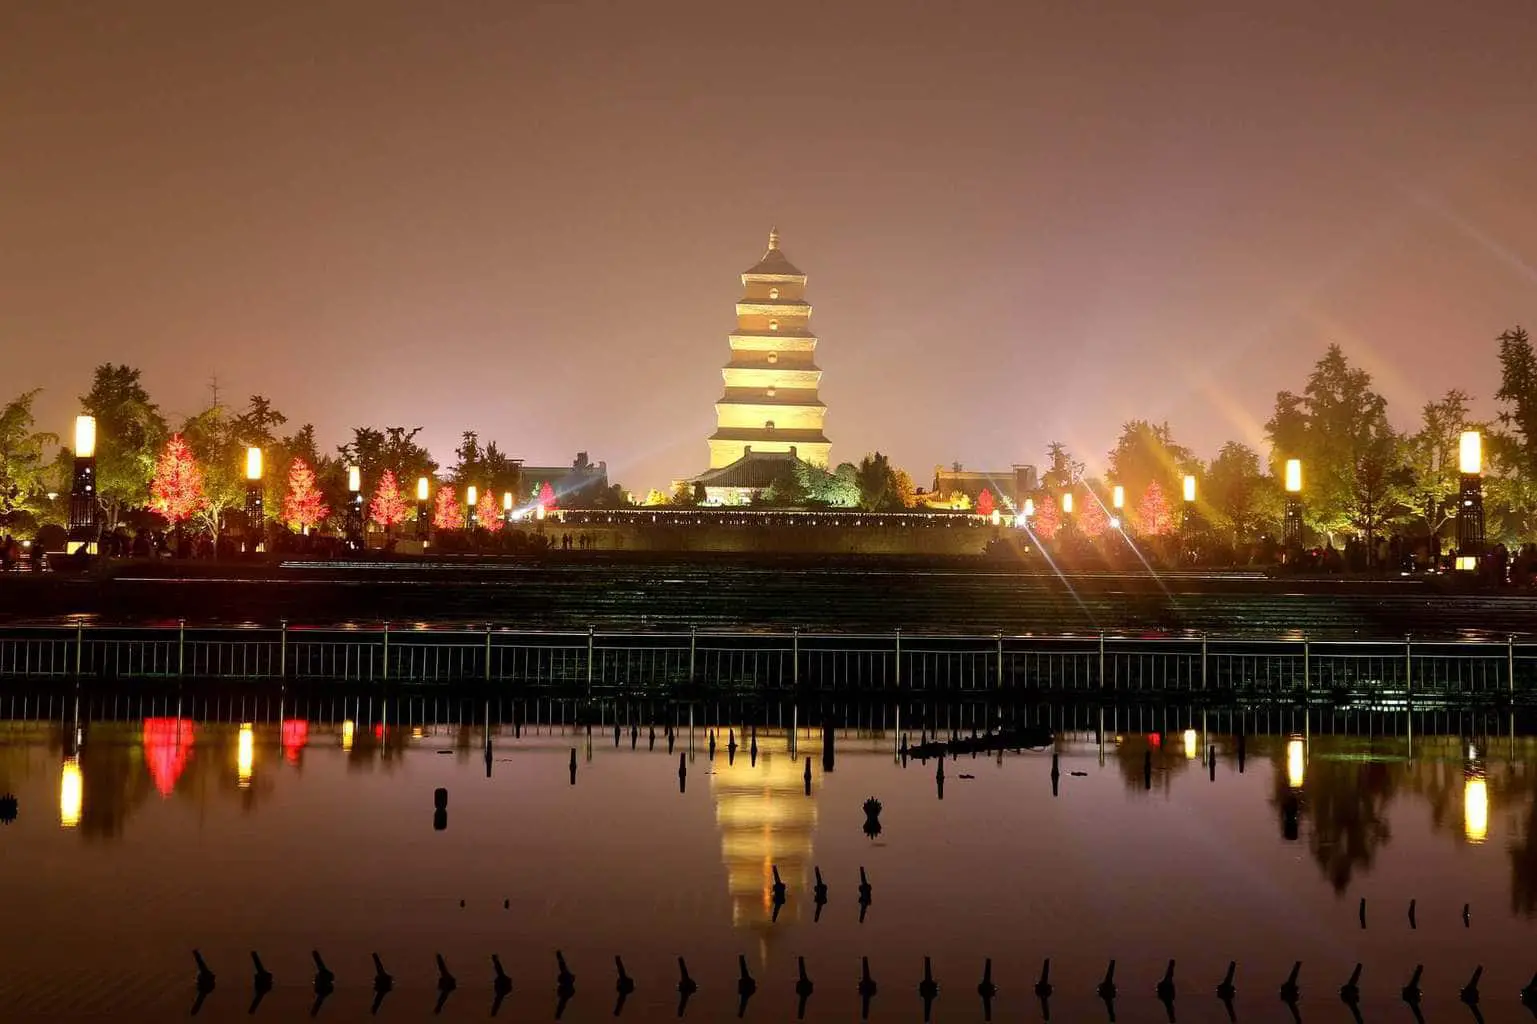 Image of the wild goose pagoda in Xian China at night